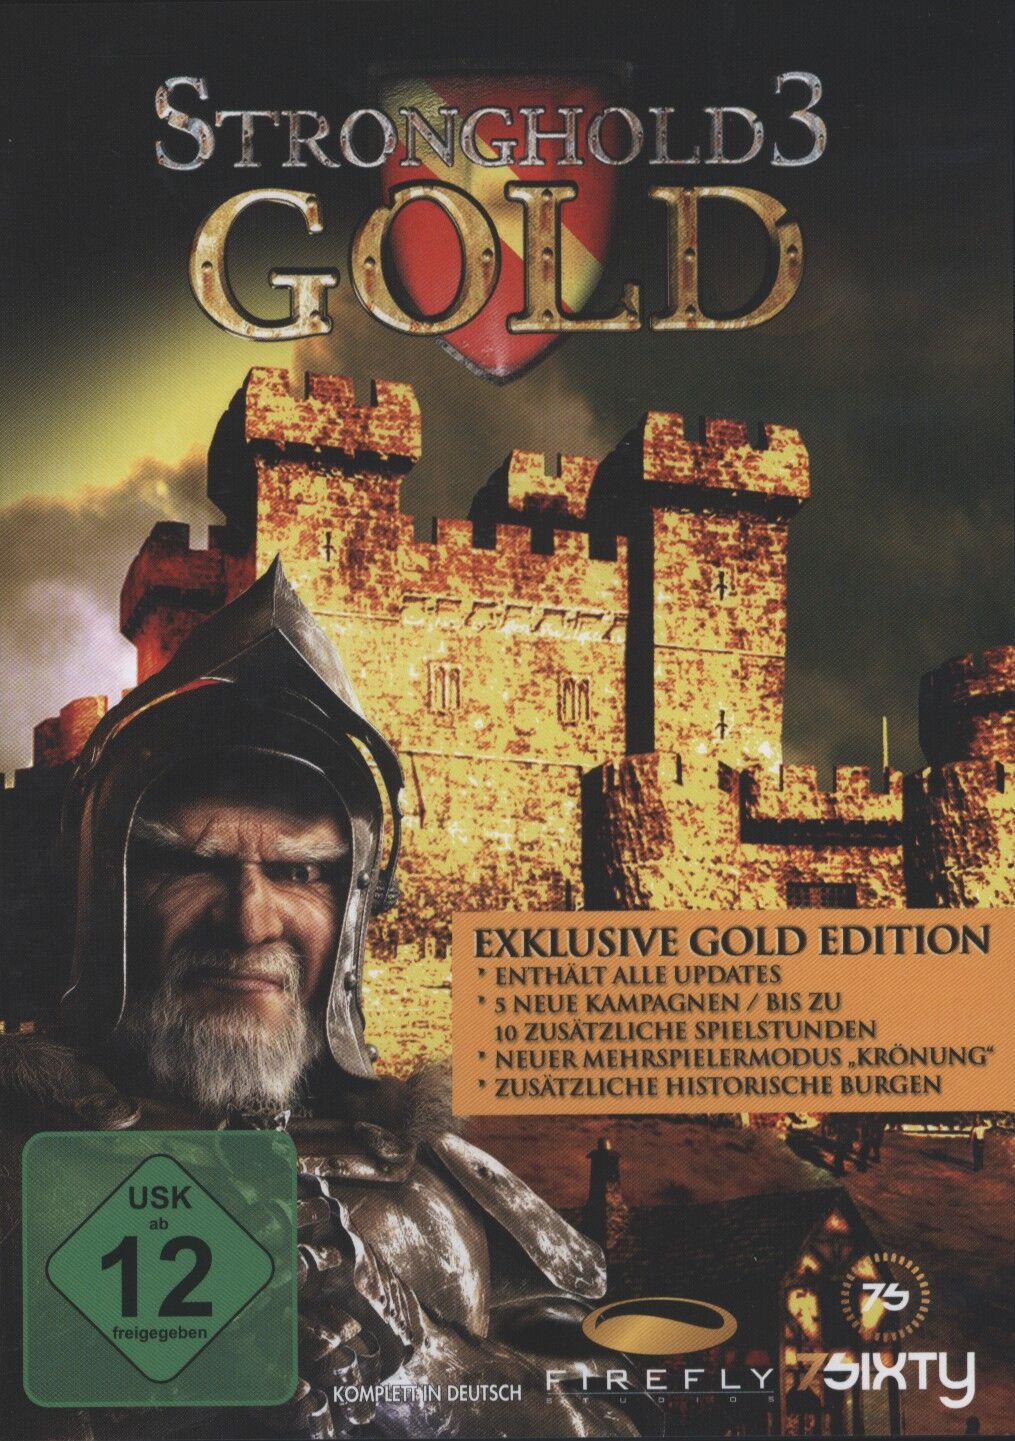 Divers Firefly Studios - Pyramide: Stronghold 3 - Gold Edition [PC] (D)